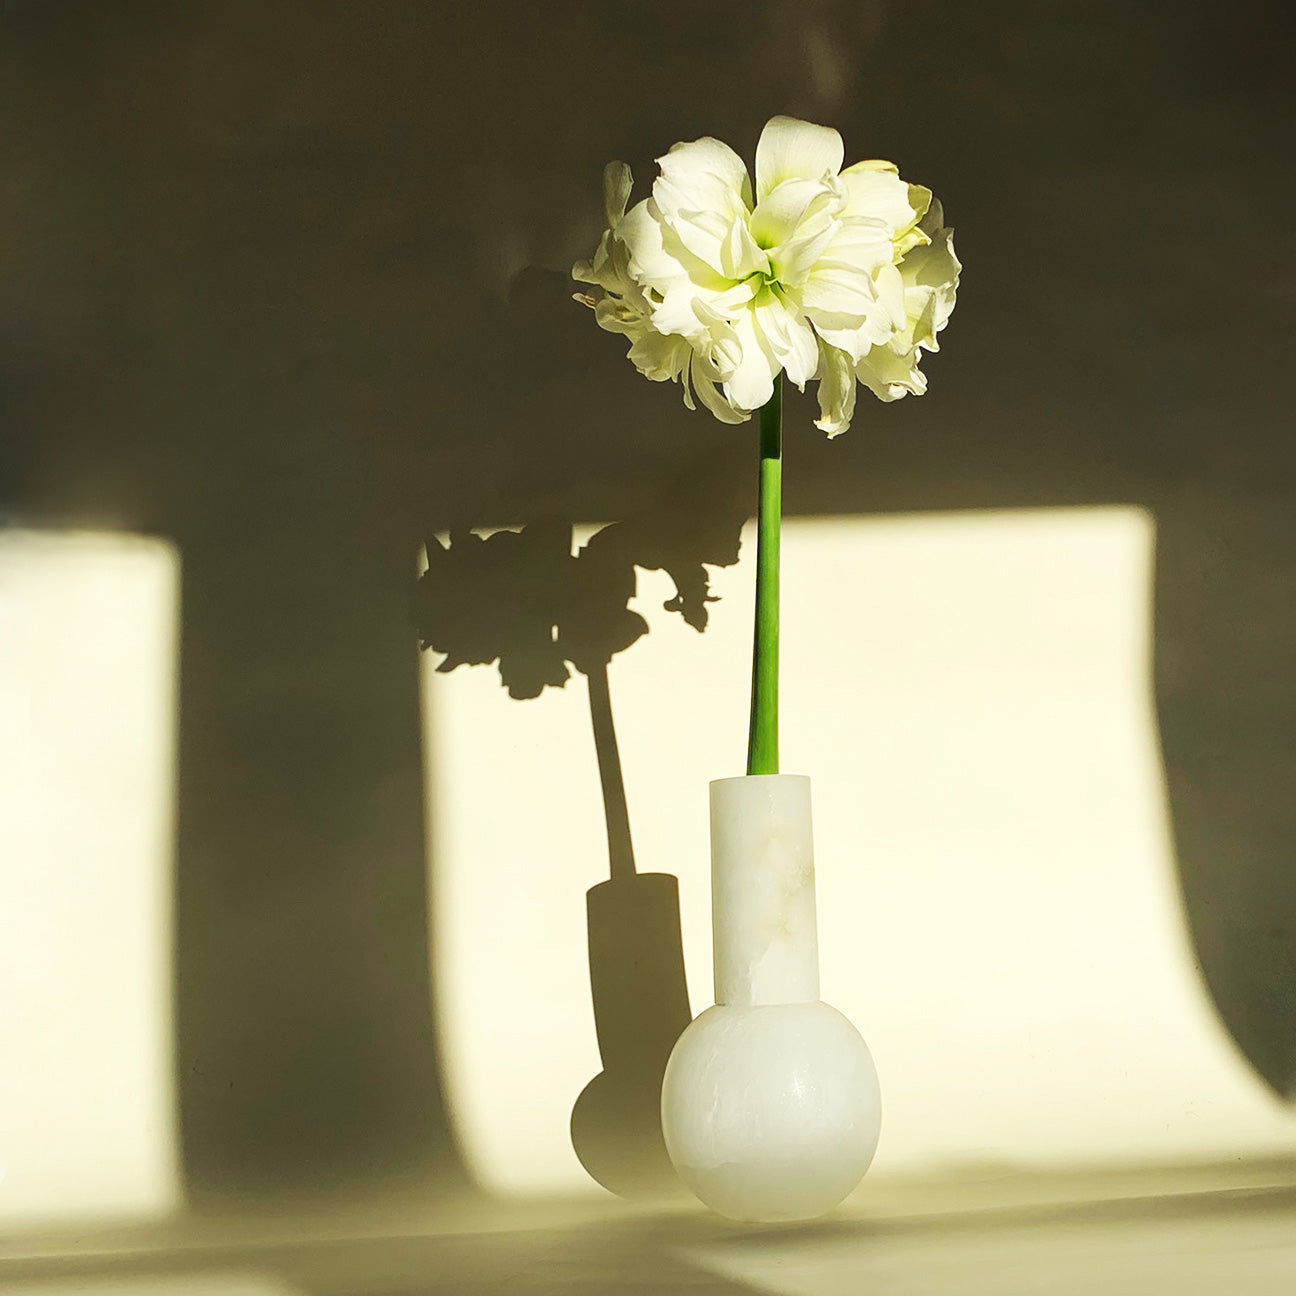 Image of M+A NYC Lolita Vase in Alabaster with a single bold Amaryllis stem basking in the late afternoon sun.